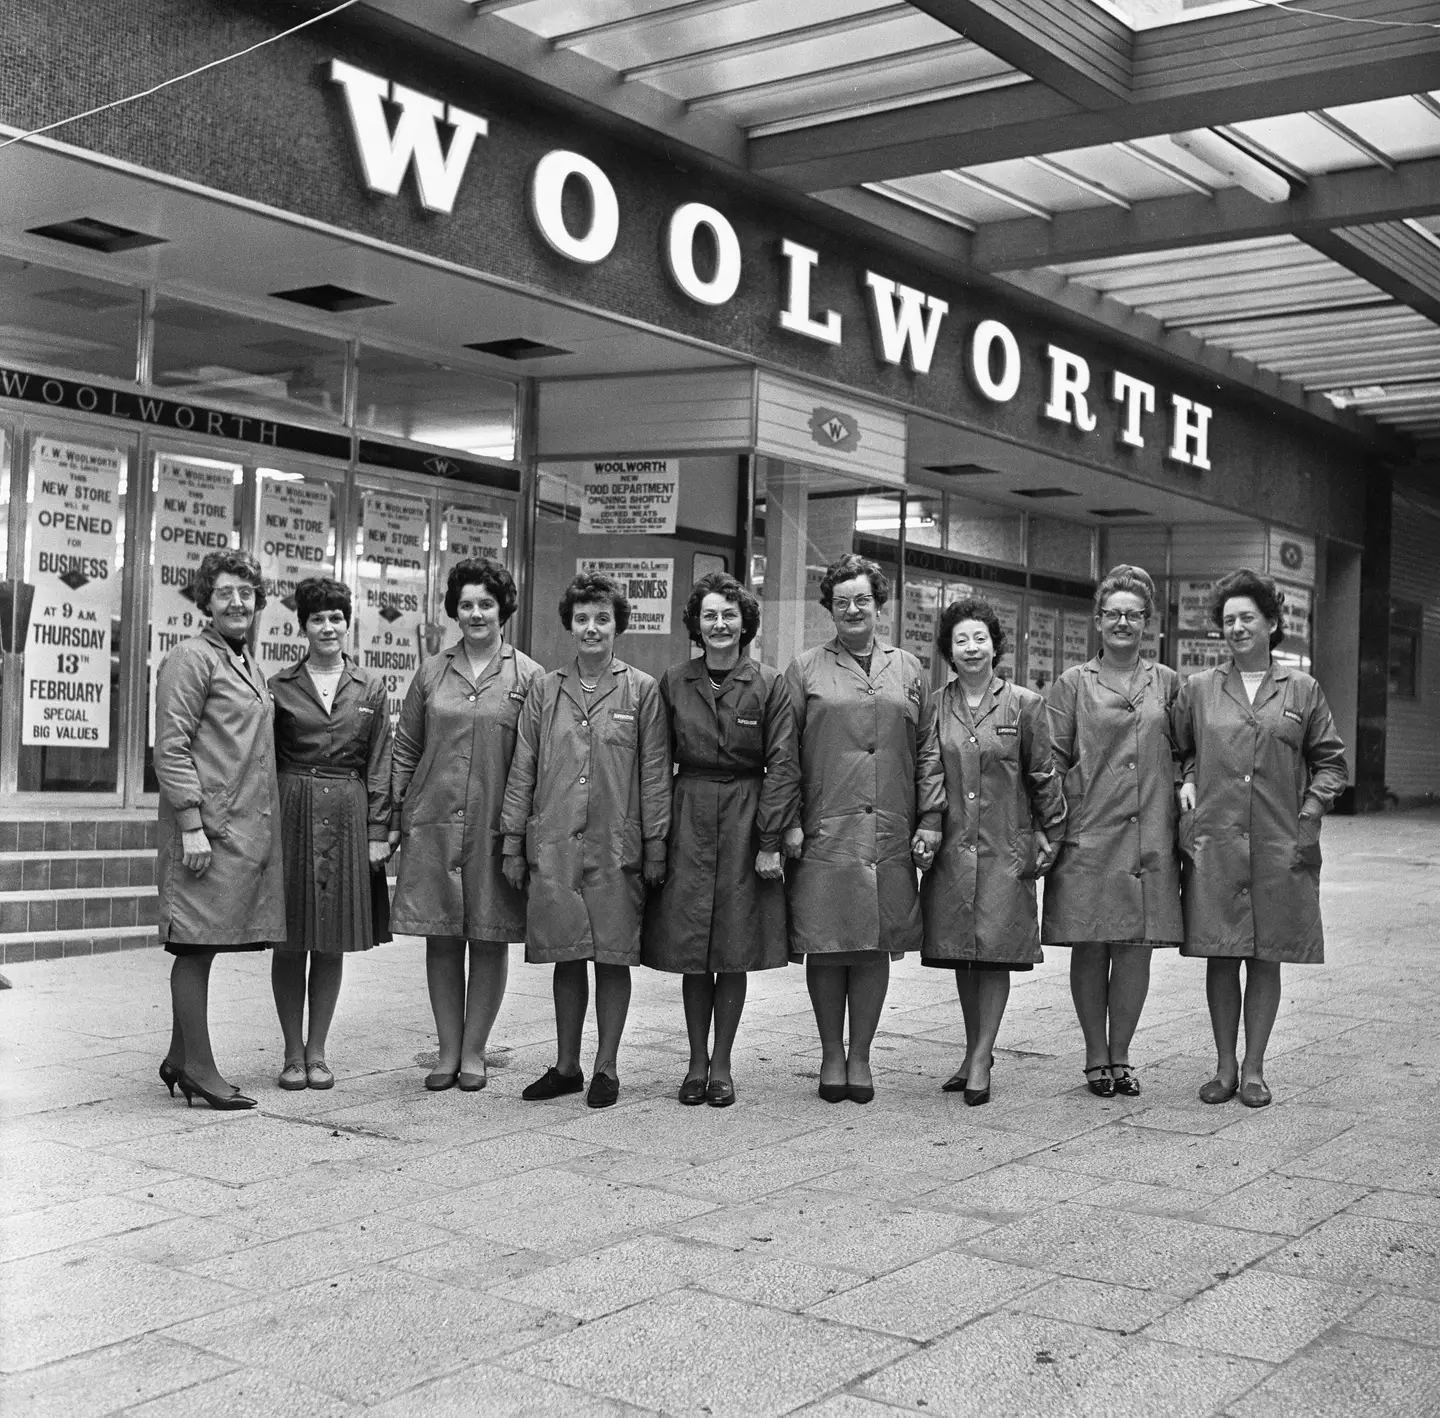 Woolworths was founded in 1909.